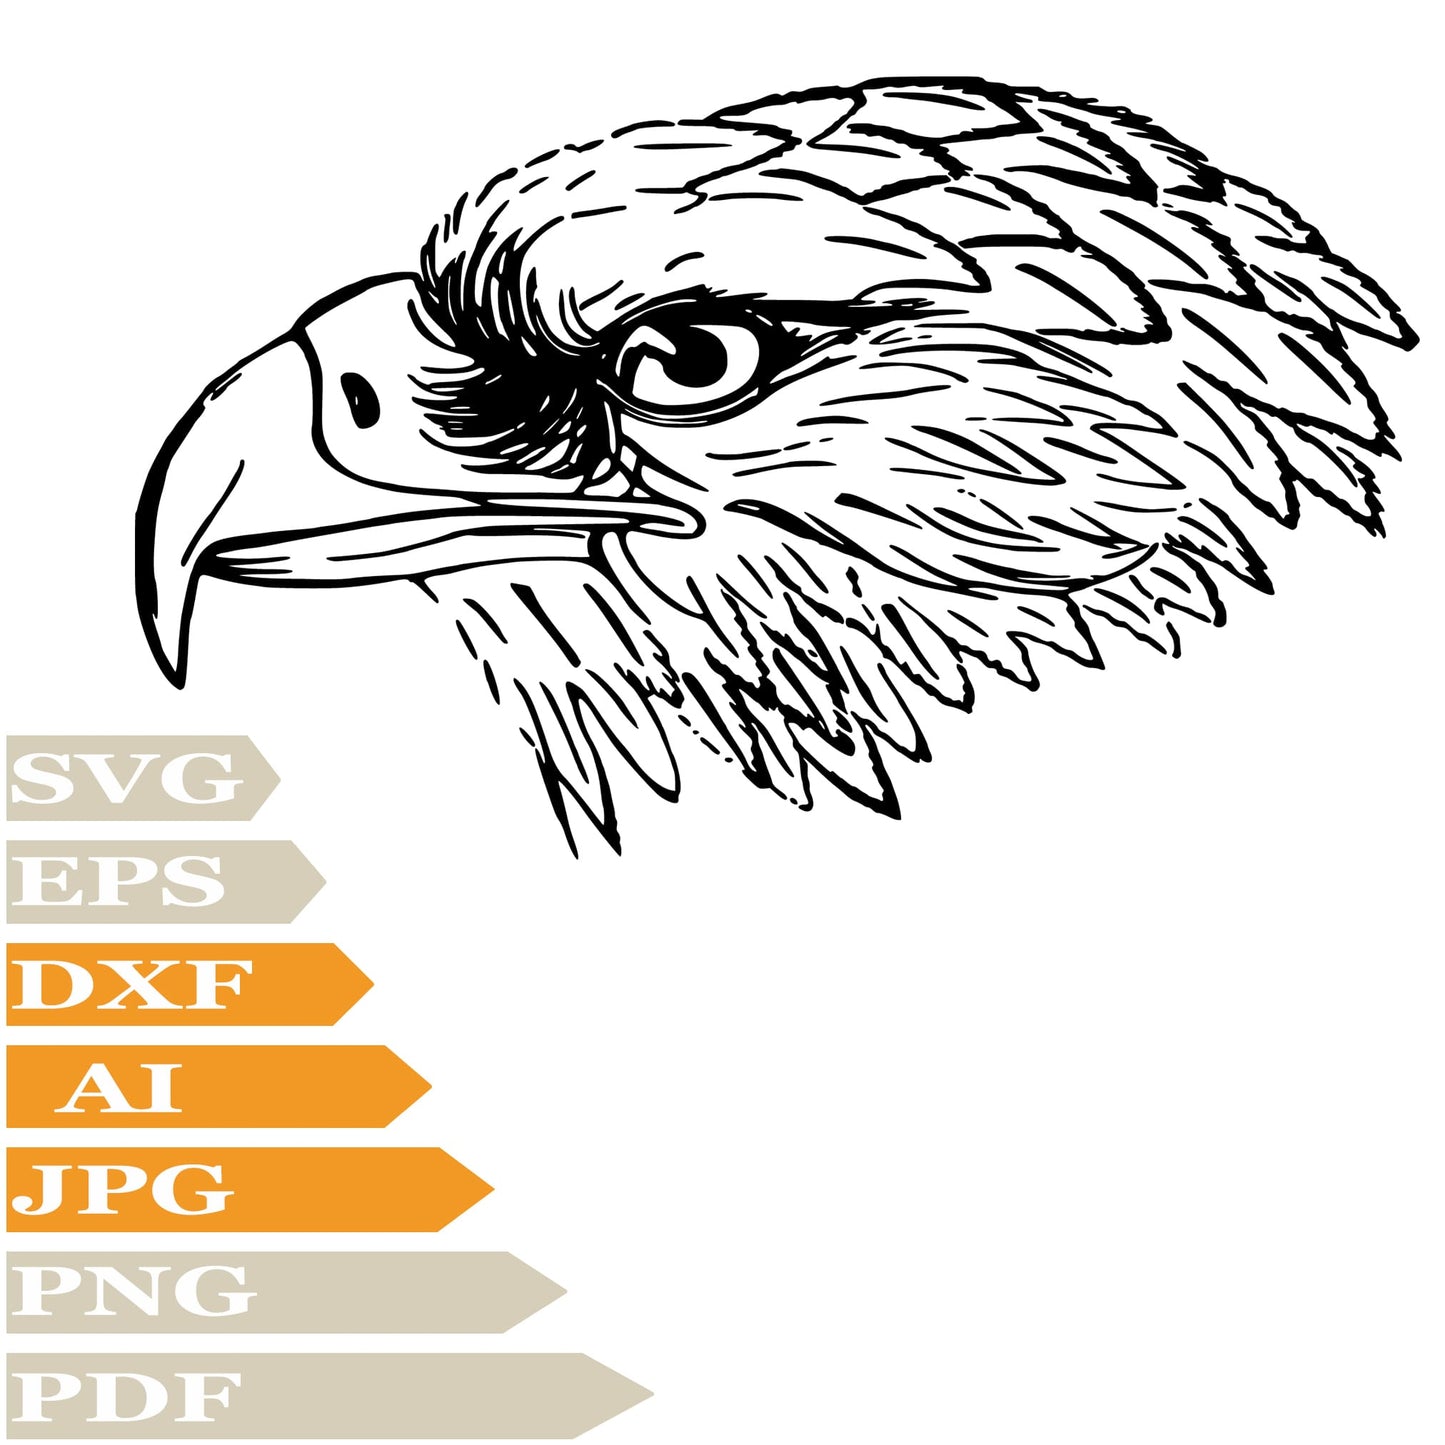 Eagle, Eagle Head Svg File, Image Cut, Png, For Tattoo, Silhouette, Digital Vector Download, Cut File, Clipart, For Cricut